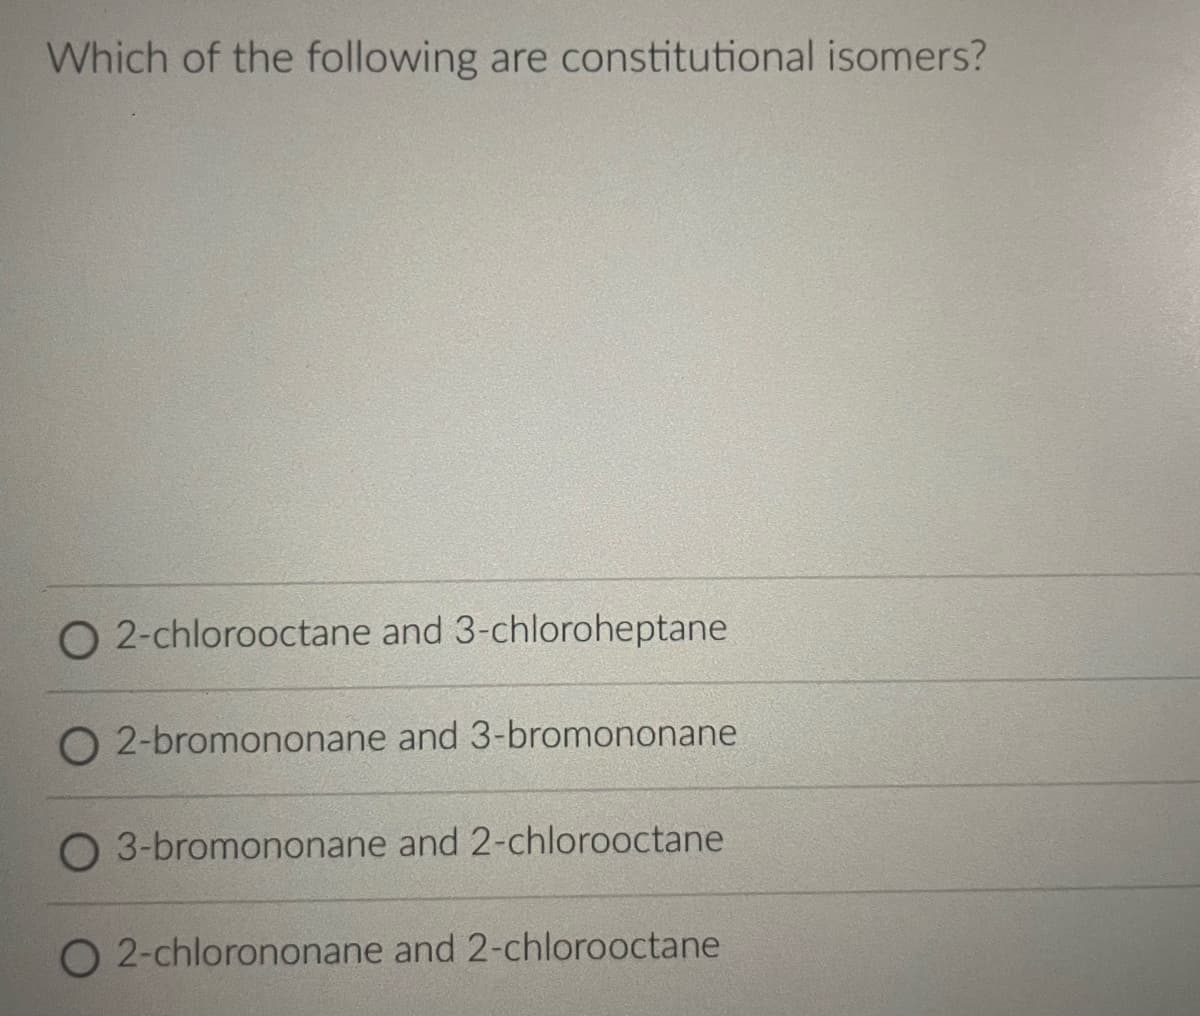 Which of the following are constitutional isomers?
O2-chlorooctane and 3-chloroheptane
O2-bromononane and 3-bromononane
3-bromononane and 2-chlorooctane
O 2-chlorononane and 2-chlorooctane